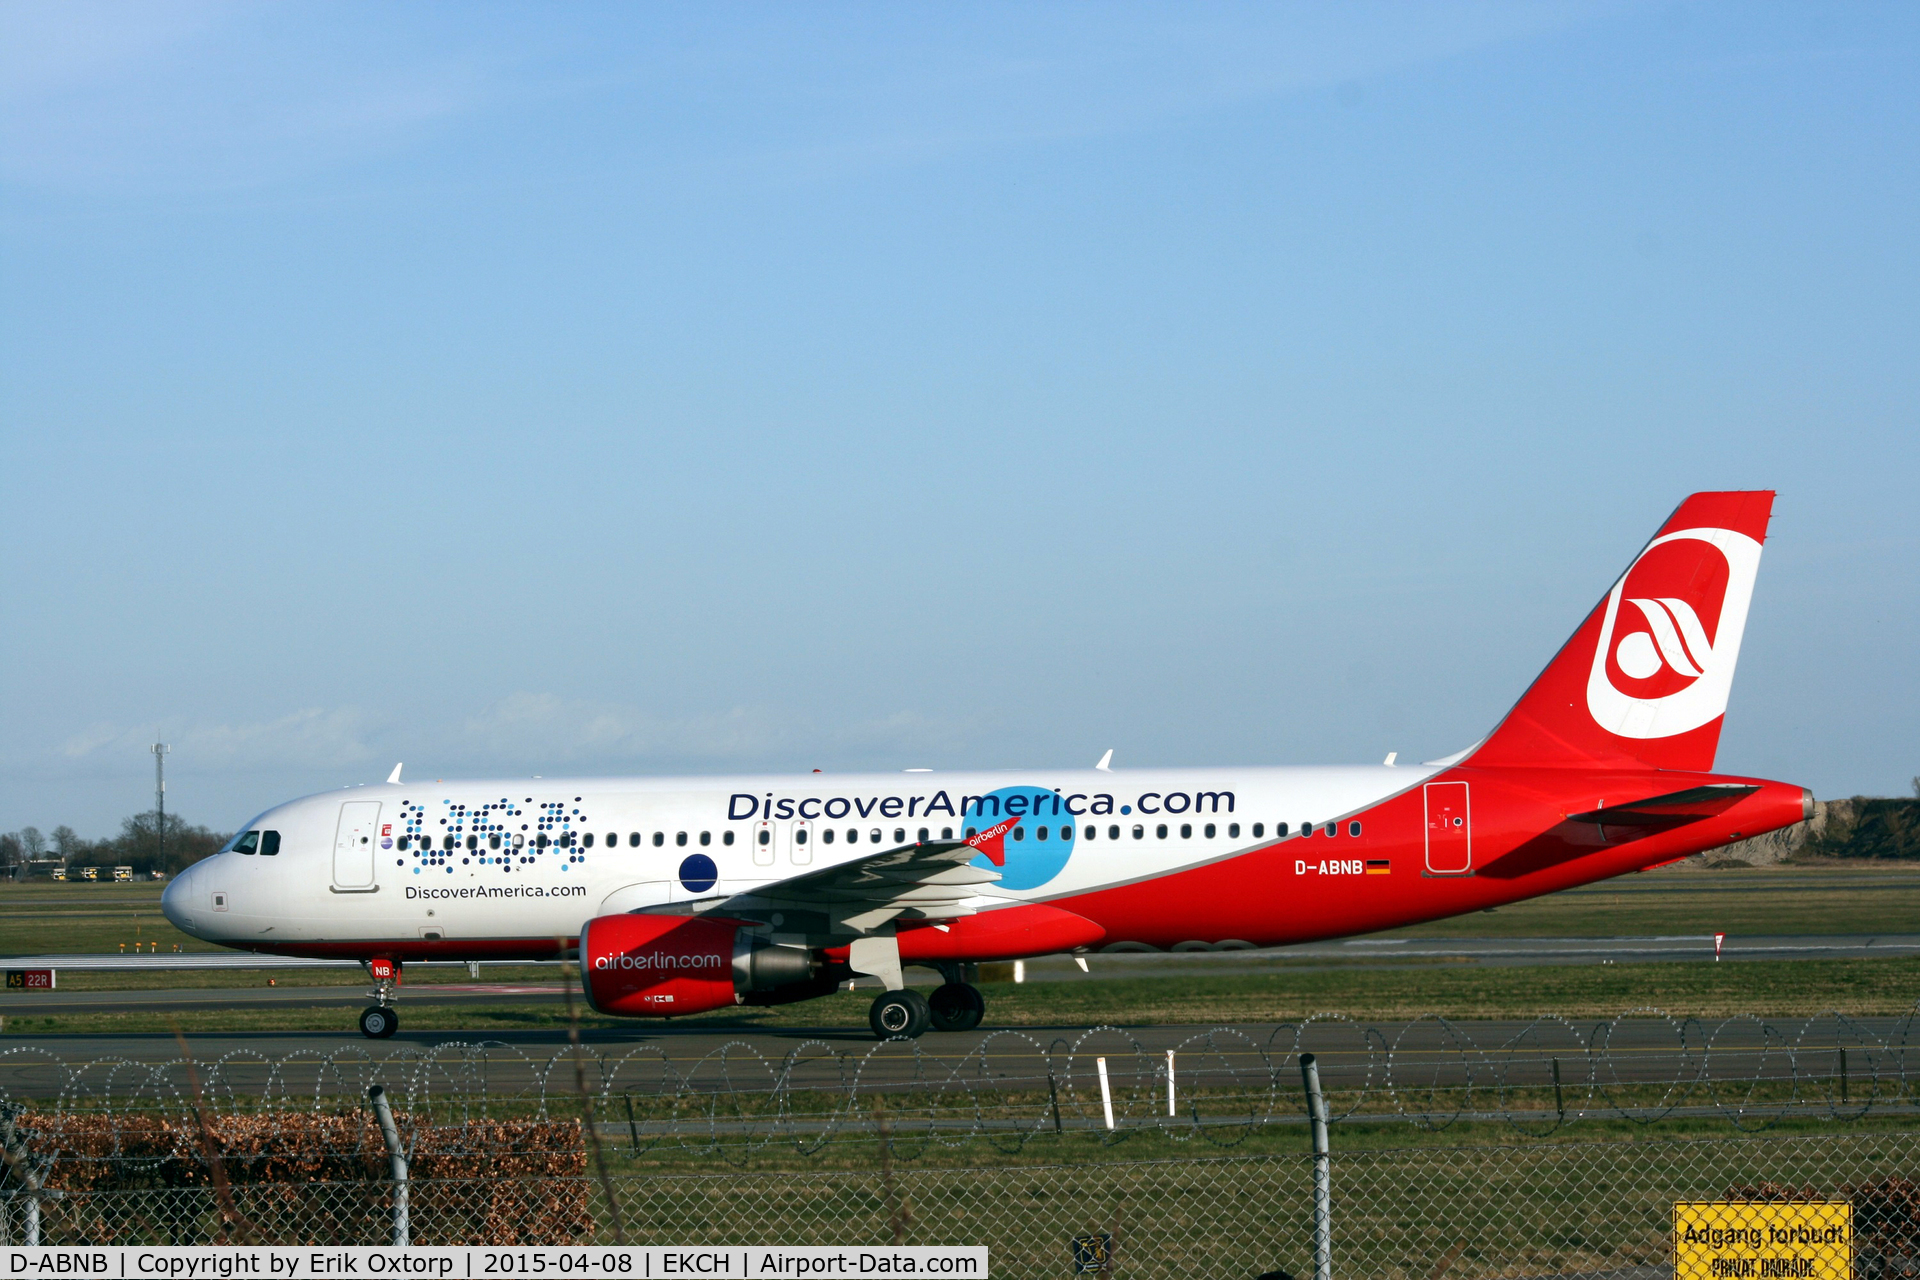 D-ABNB, 2012 Airbus A320-214 C/N 5246, Just arrived rw 04L